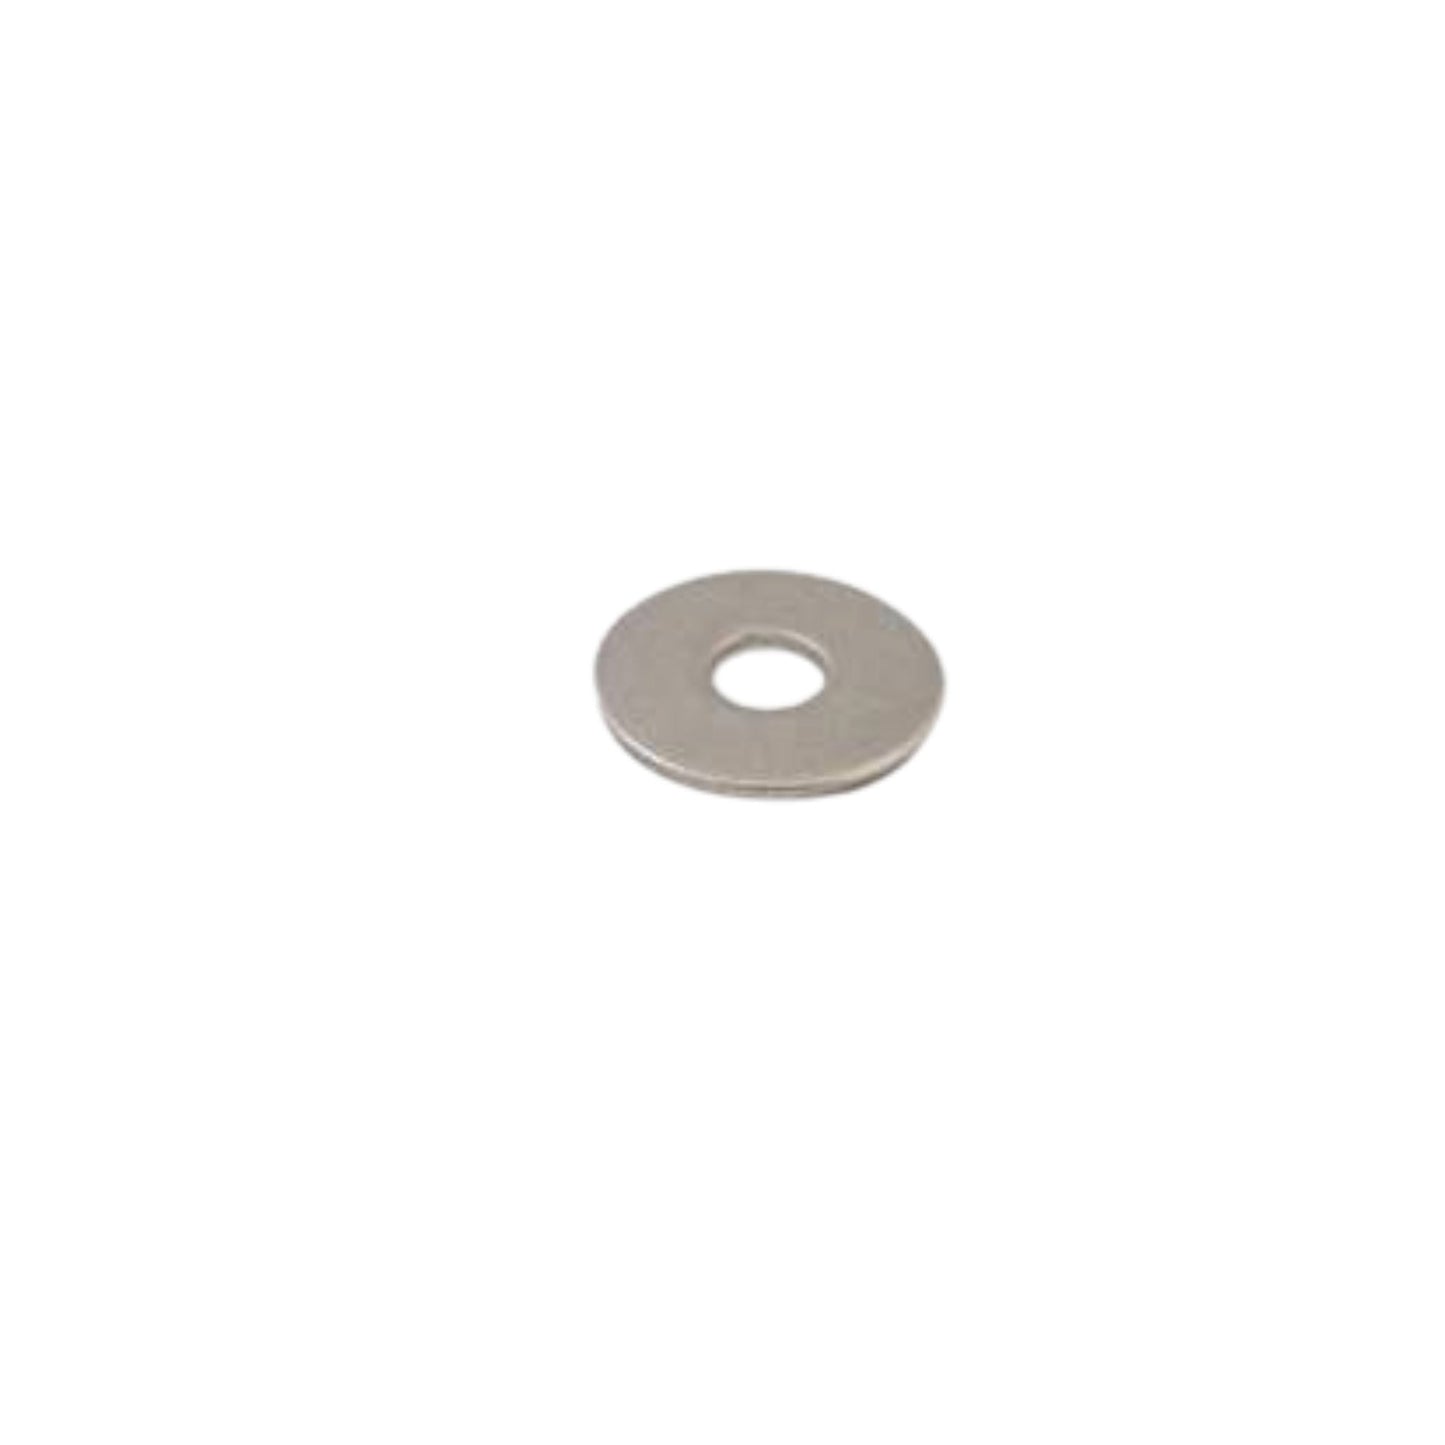 Small Fender washer 6mm